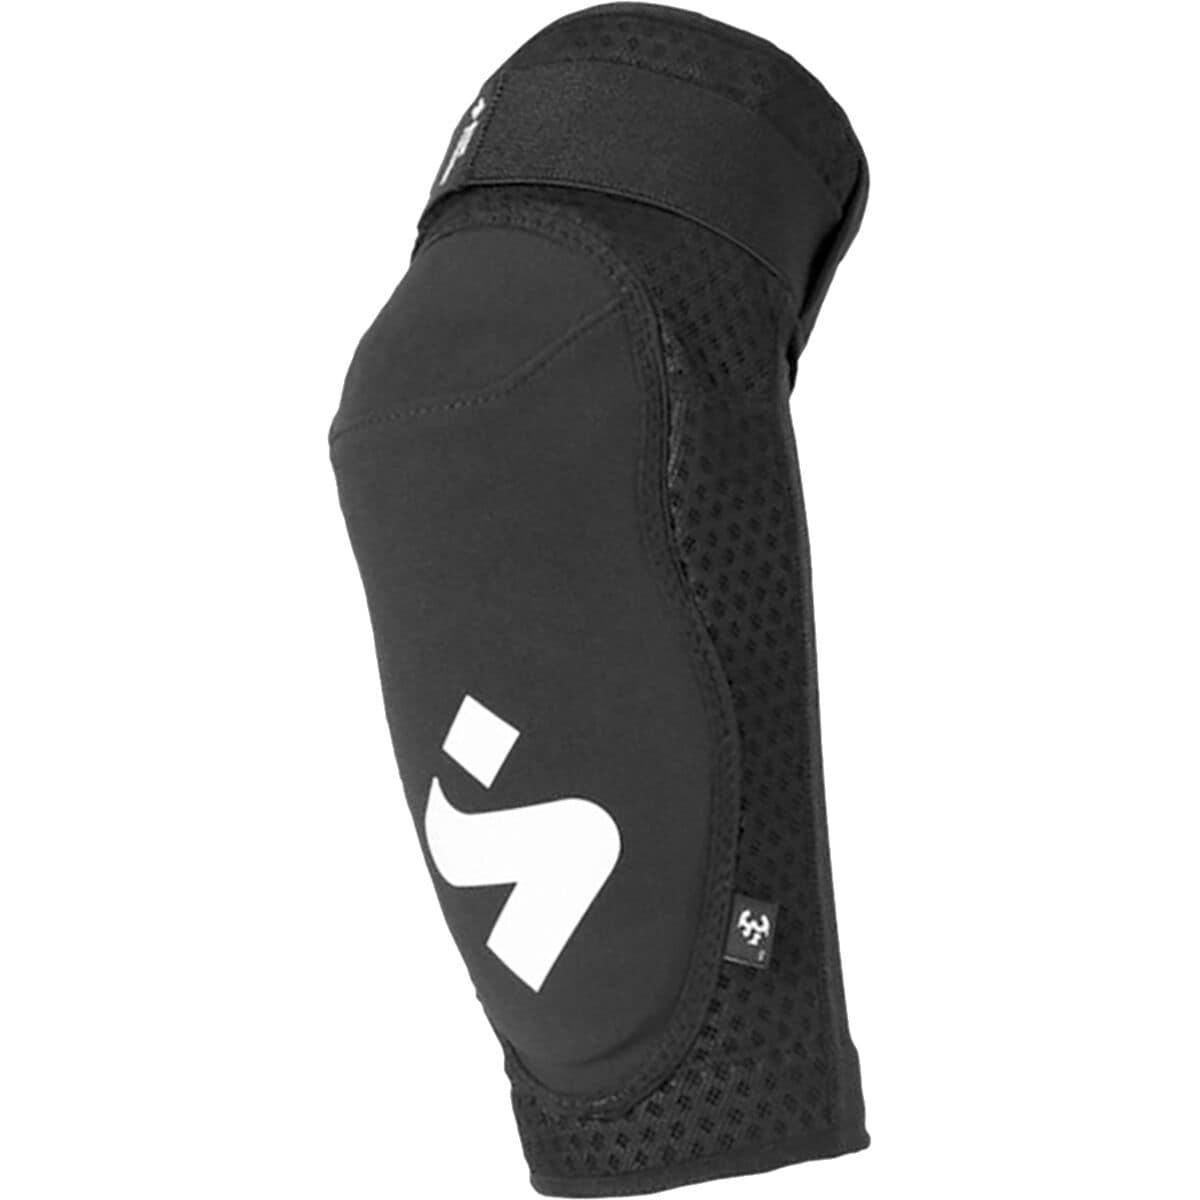 Photos - Protective Gear Set Sweet Protection Pro Elbow Guards 